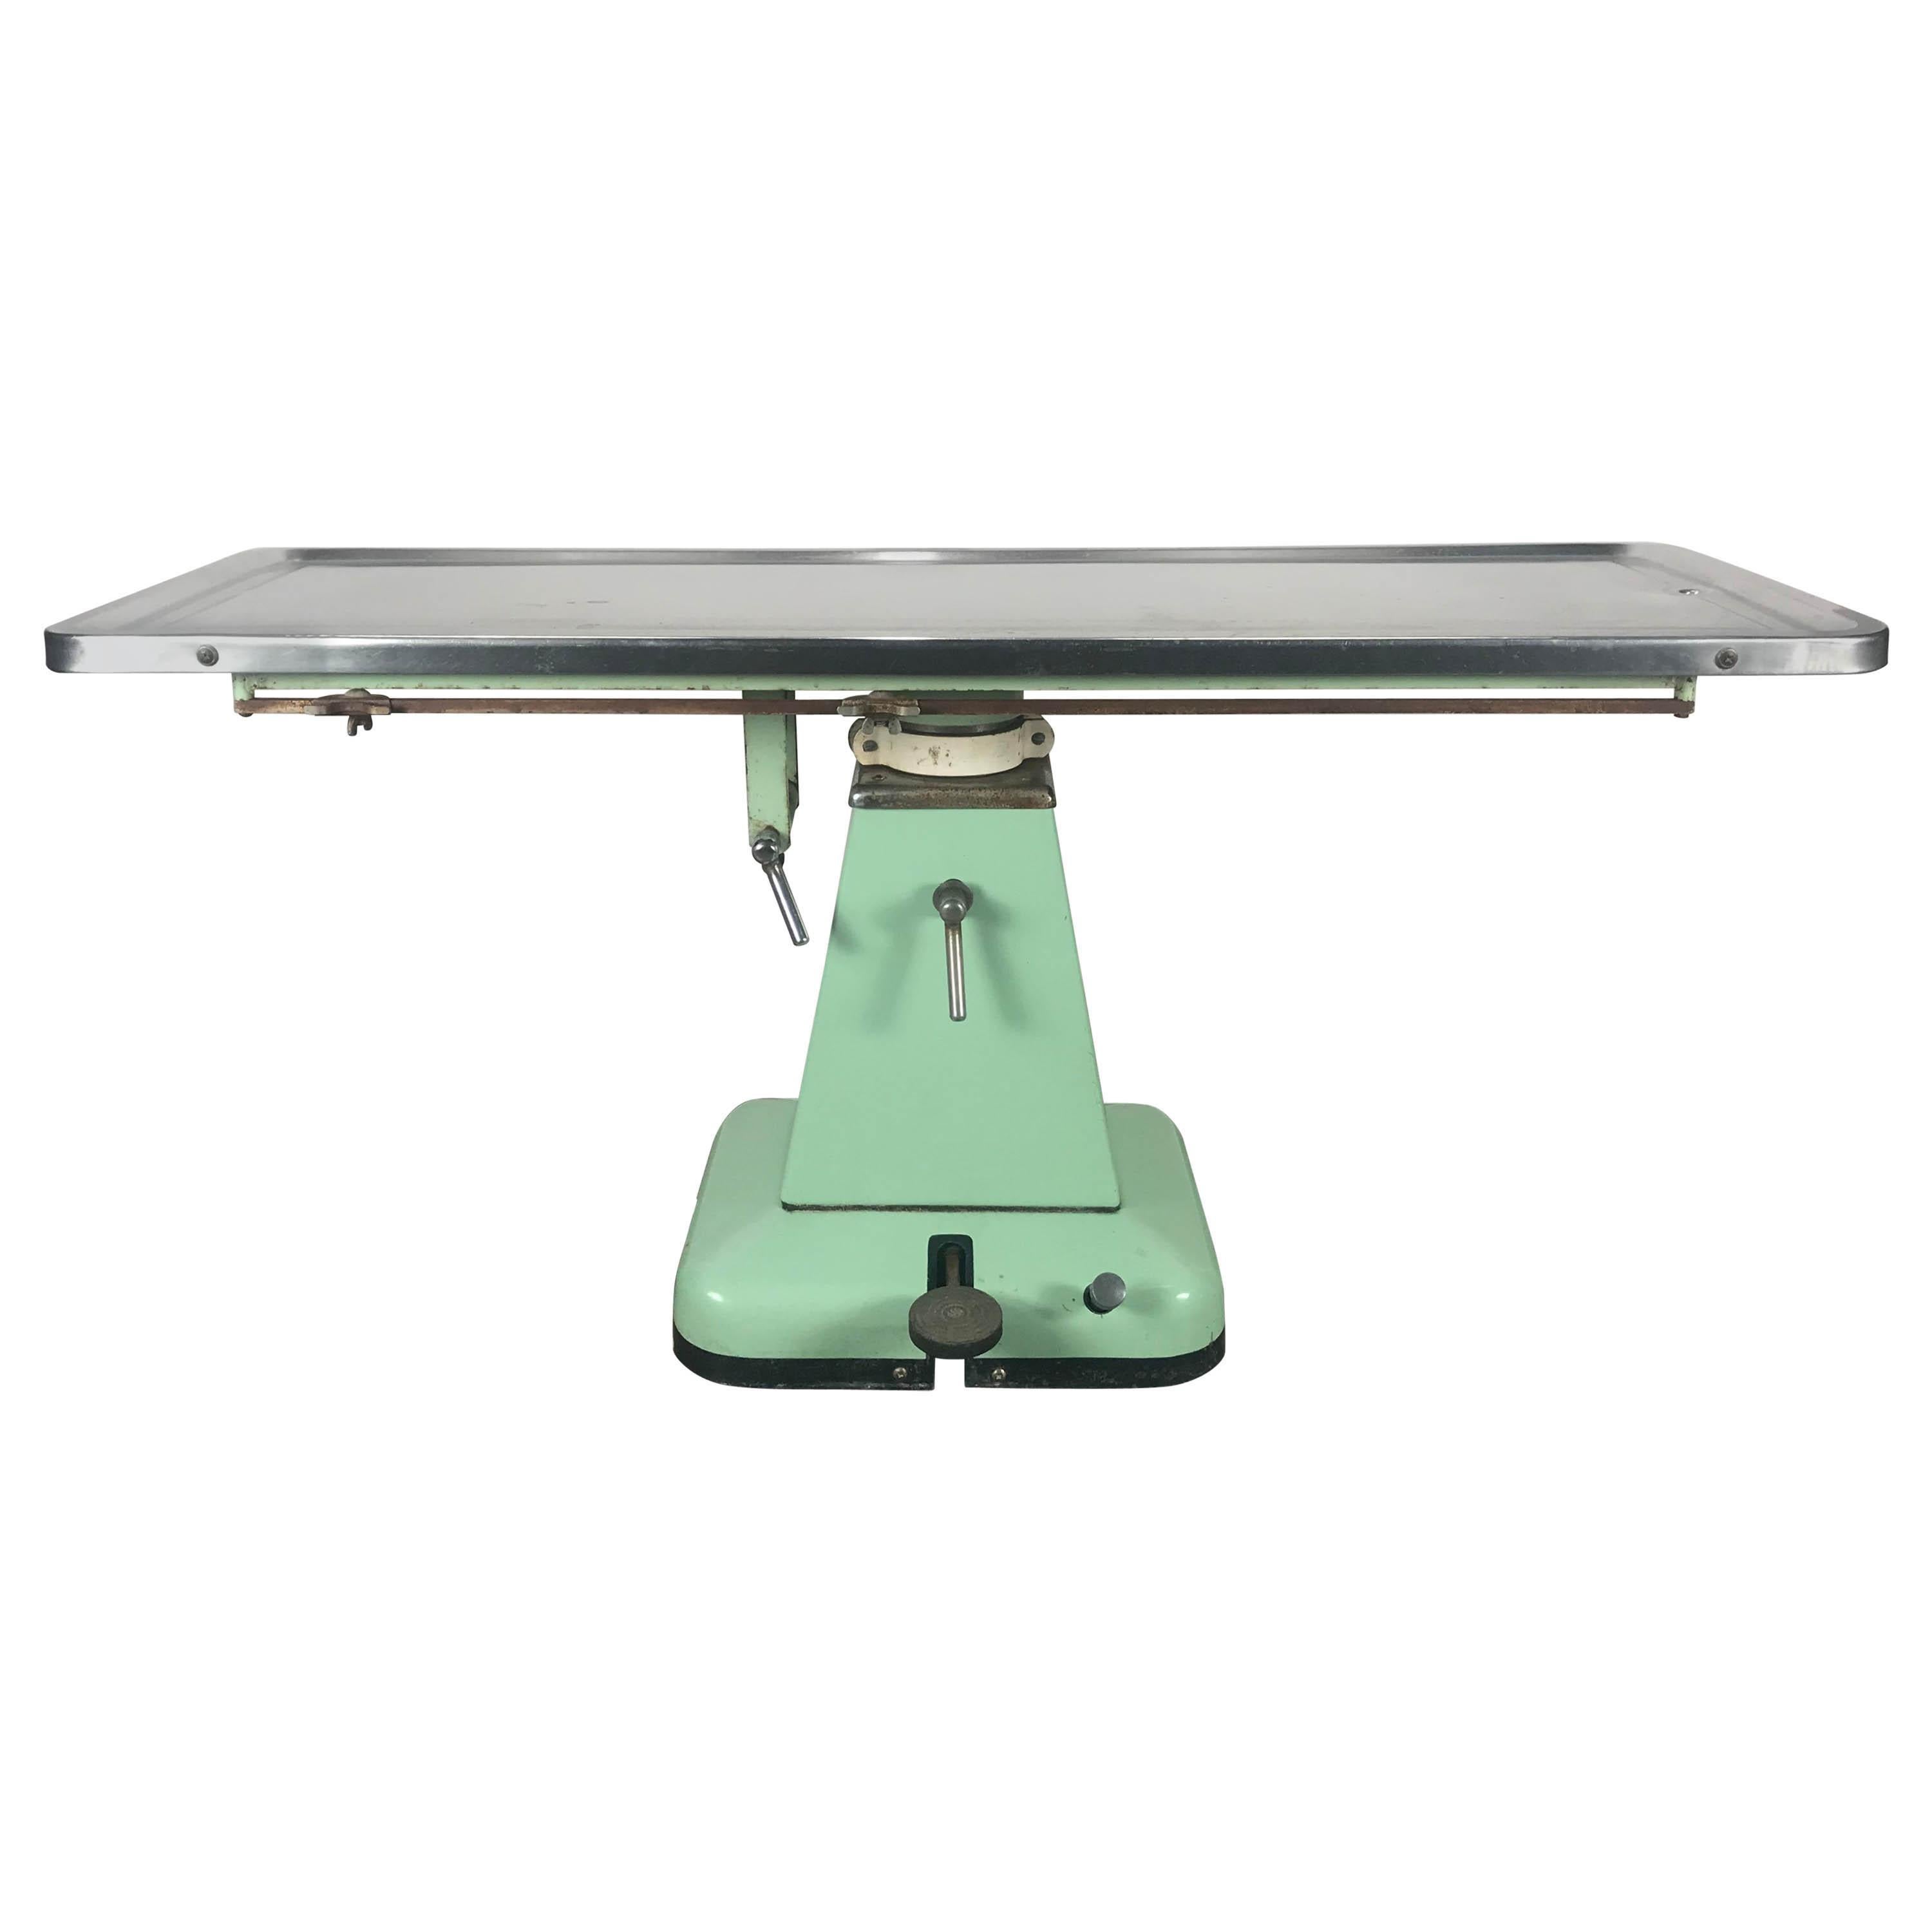 Classic Stainless and Enameled Steel Industrial Hydrualic Base Lift Table